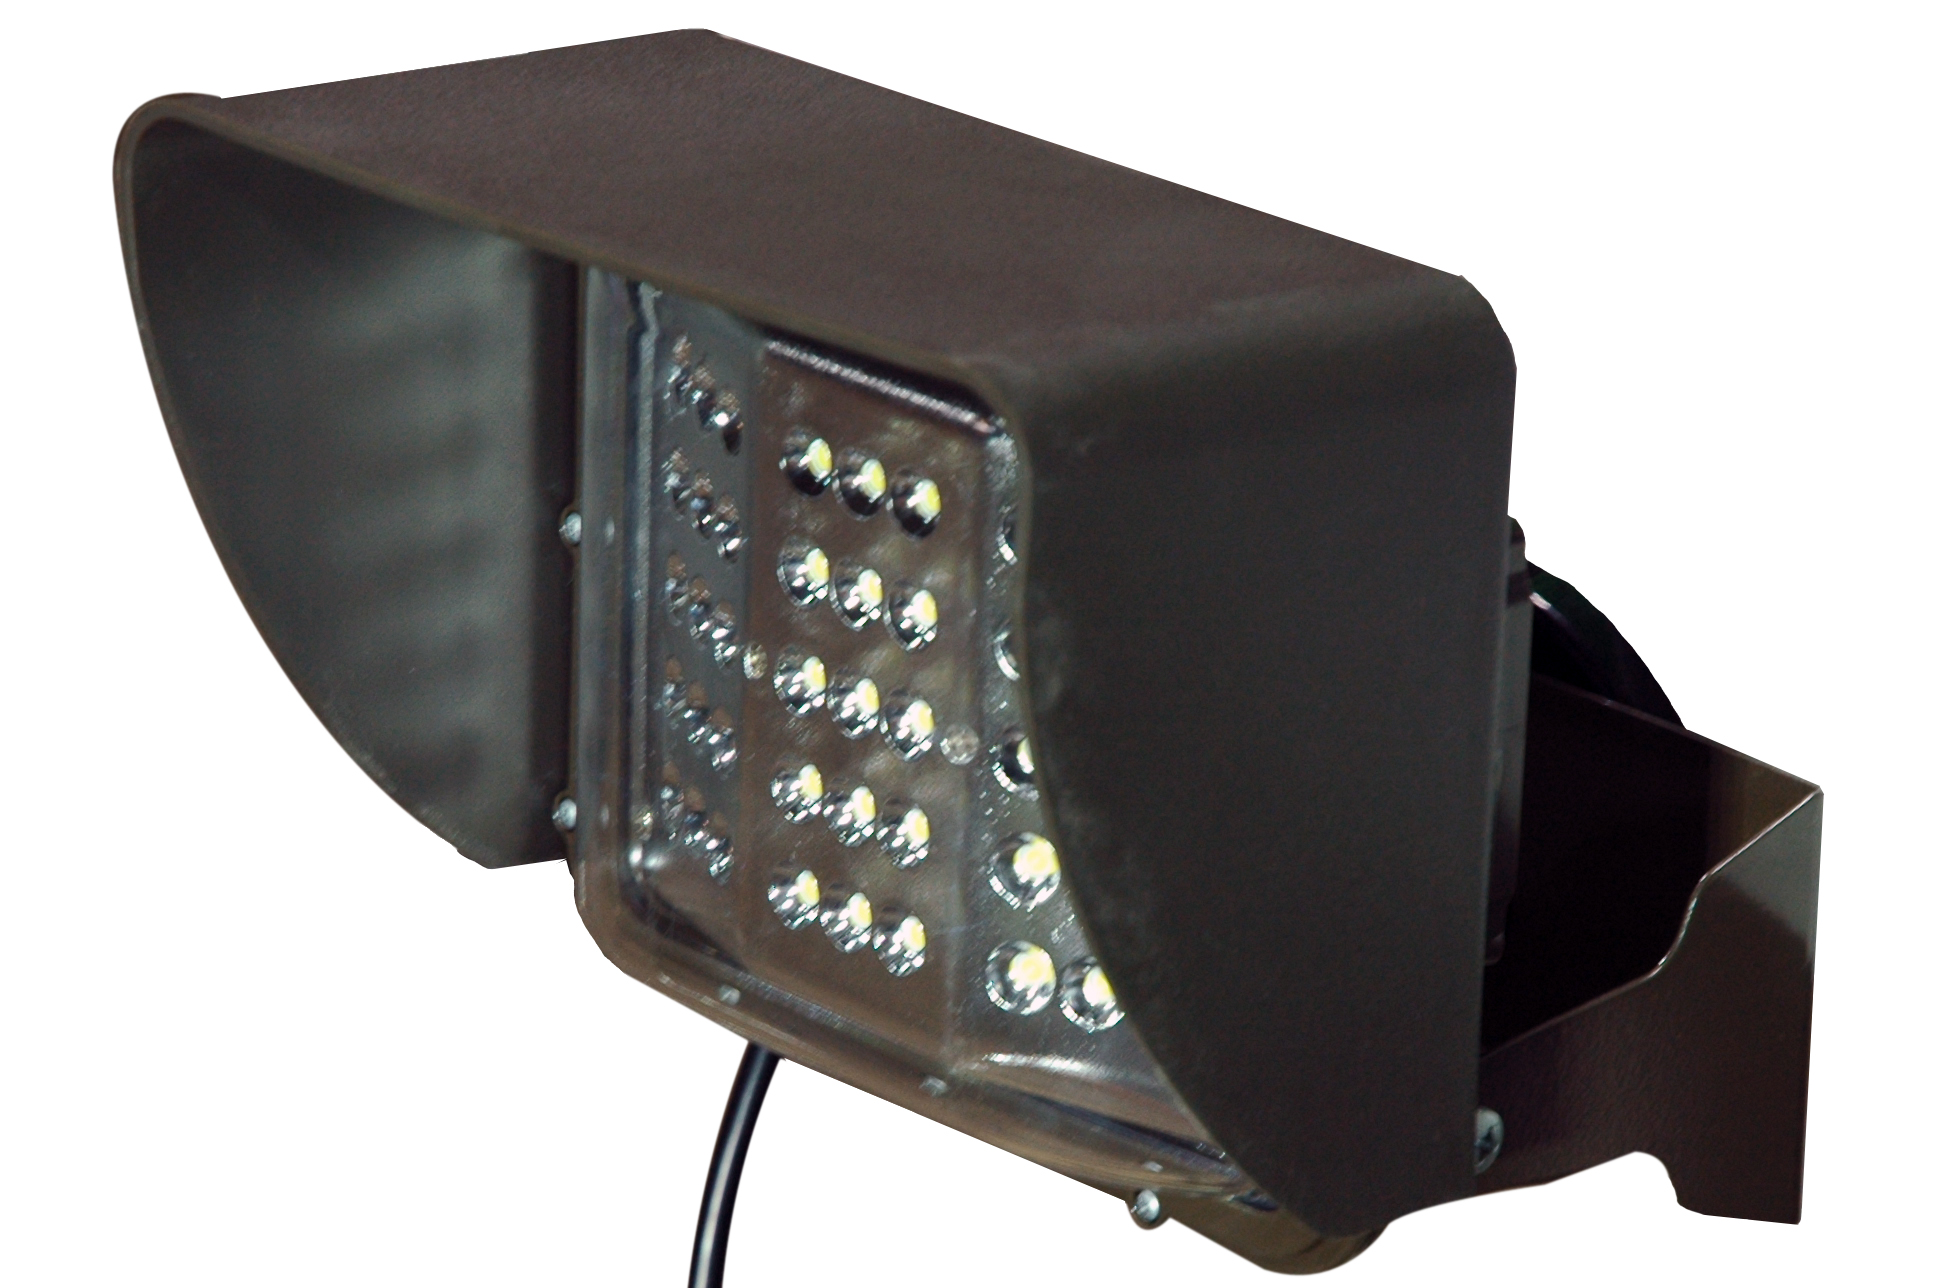 New 60 Watt LED Wall Pack Light Featuring a Removable Glare Shield